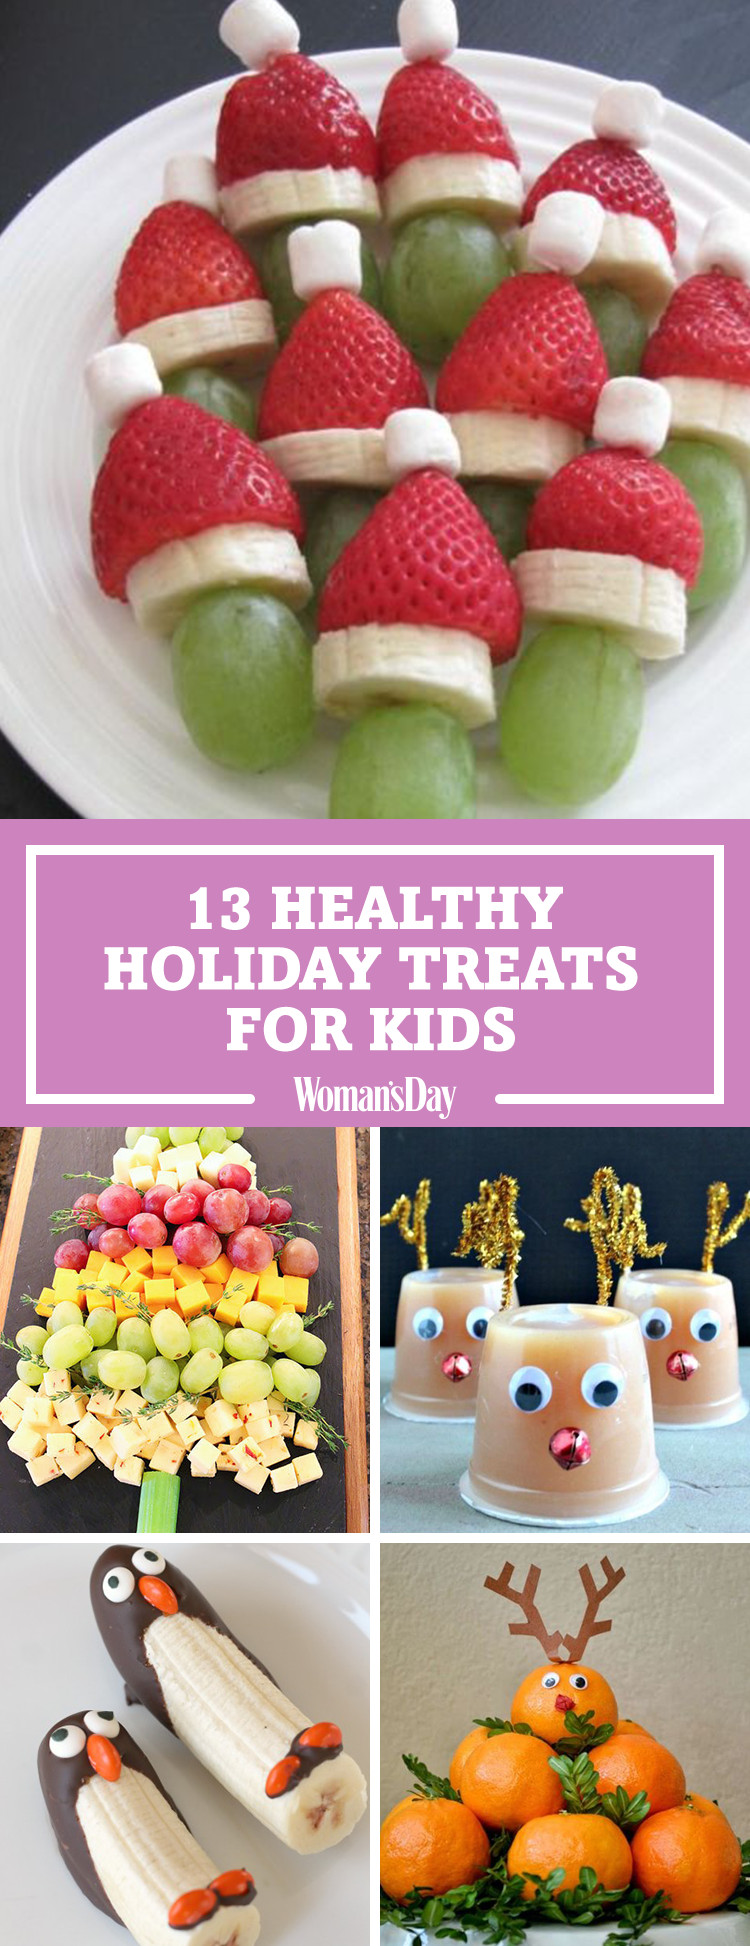 Christmas Appetizers For Kids
 17 Healthy Christmas Snacks for Kids Easy Ideas for